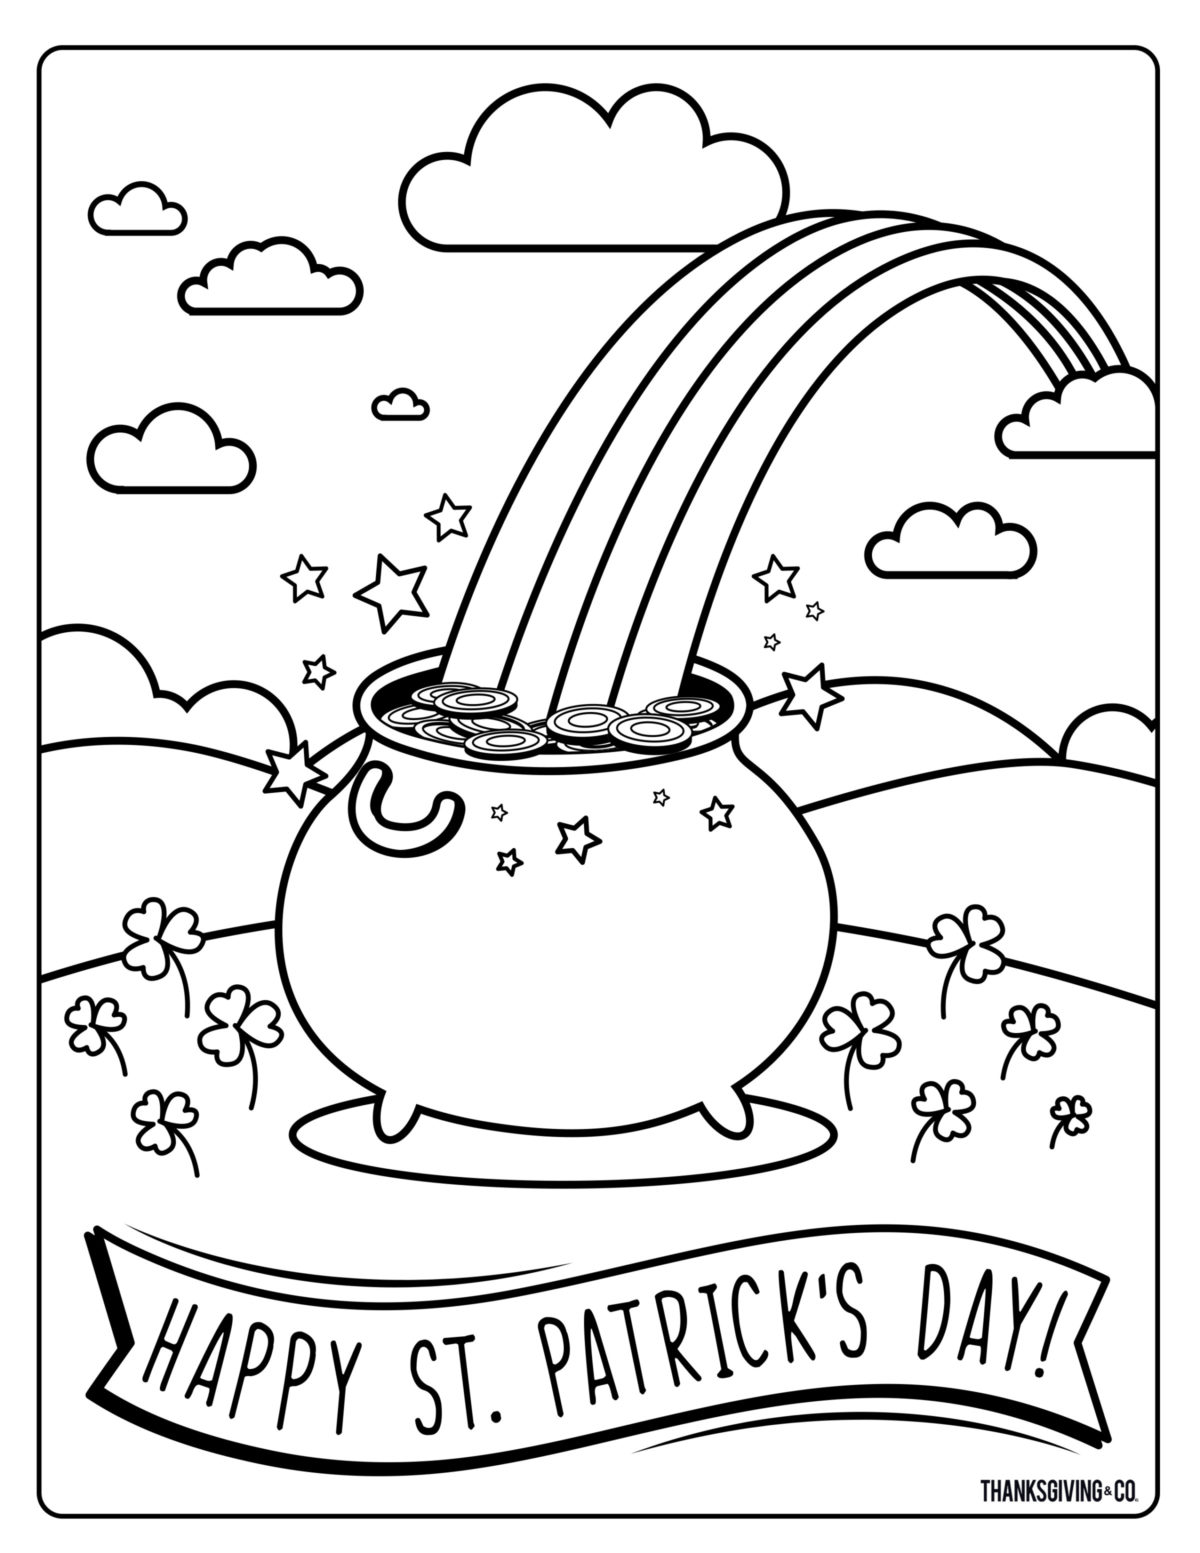 St.Patricks Day Coloring Book - Happy St. Patrick's Day pot of gold